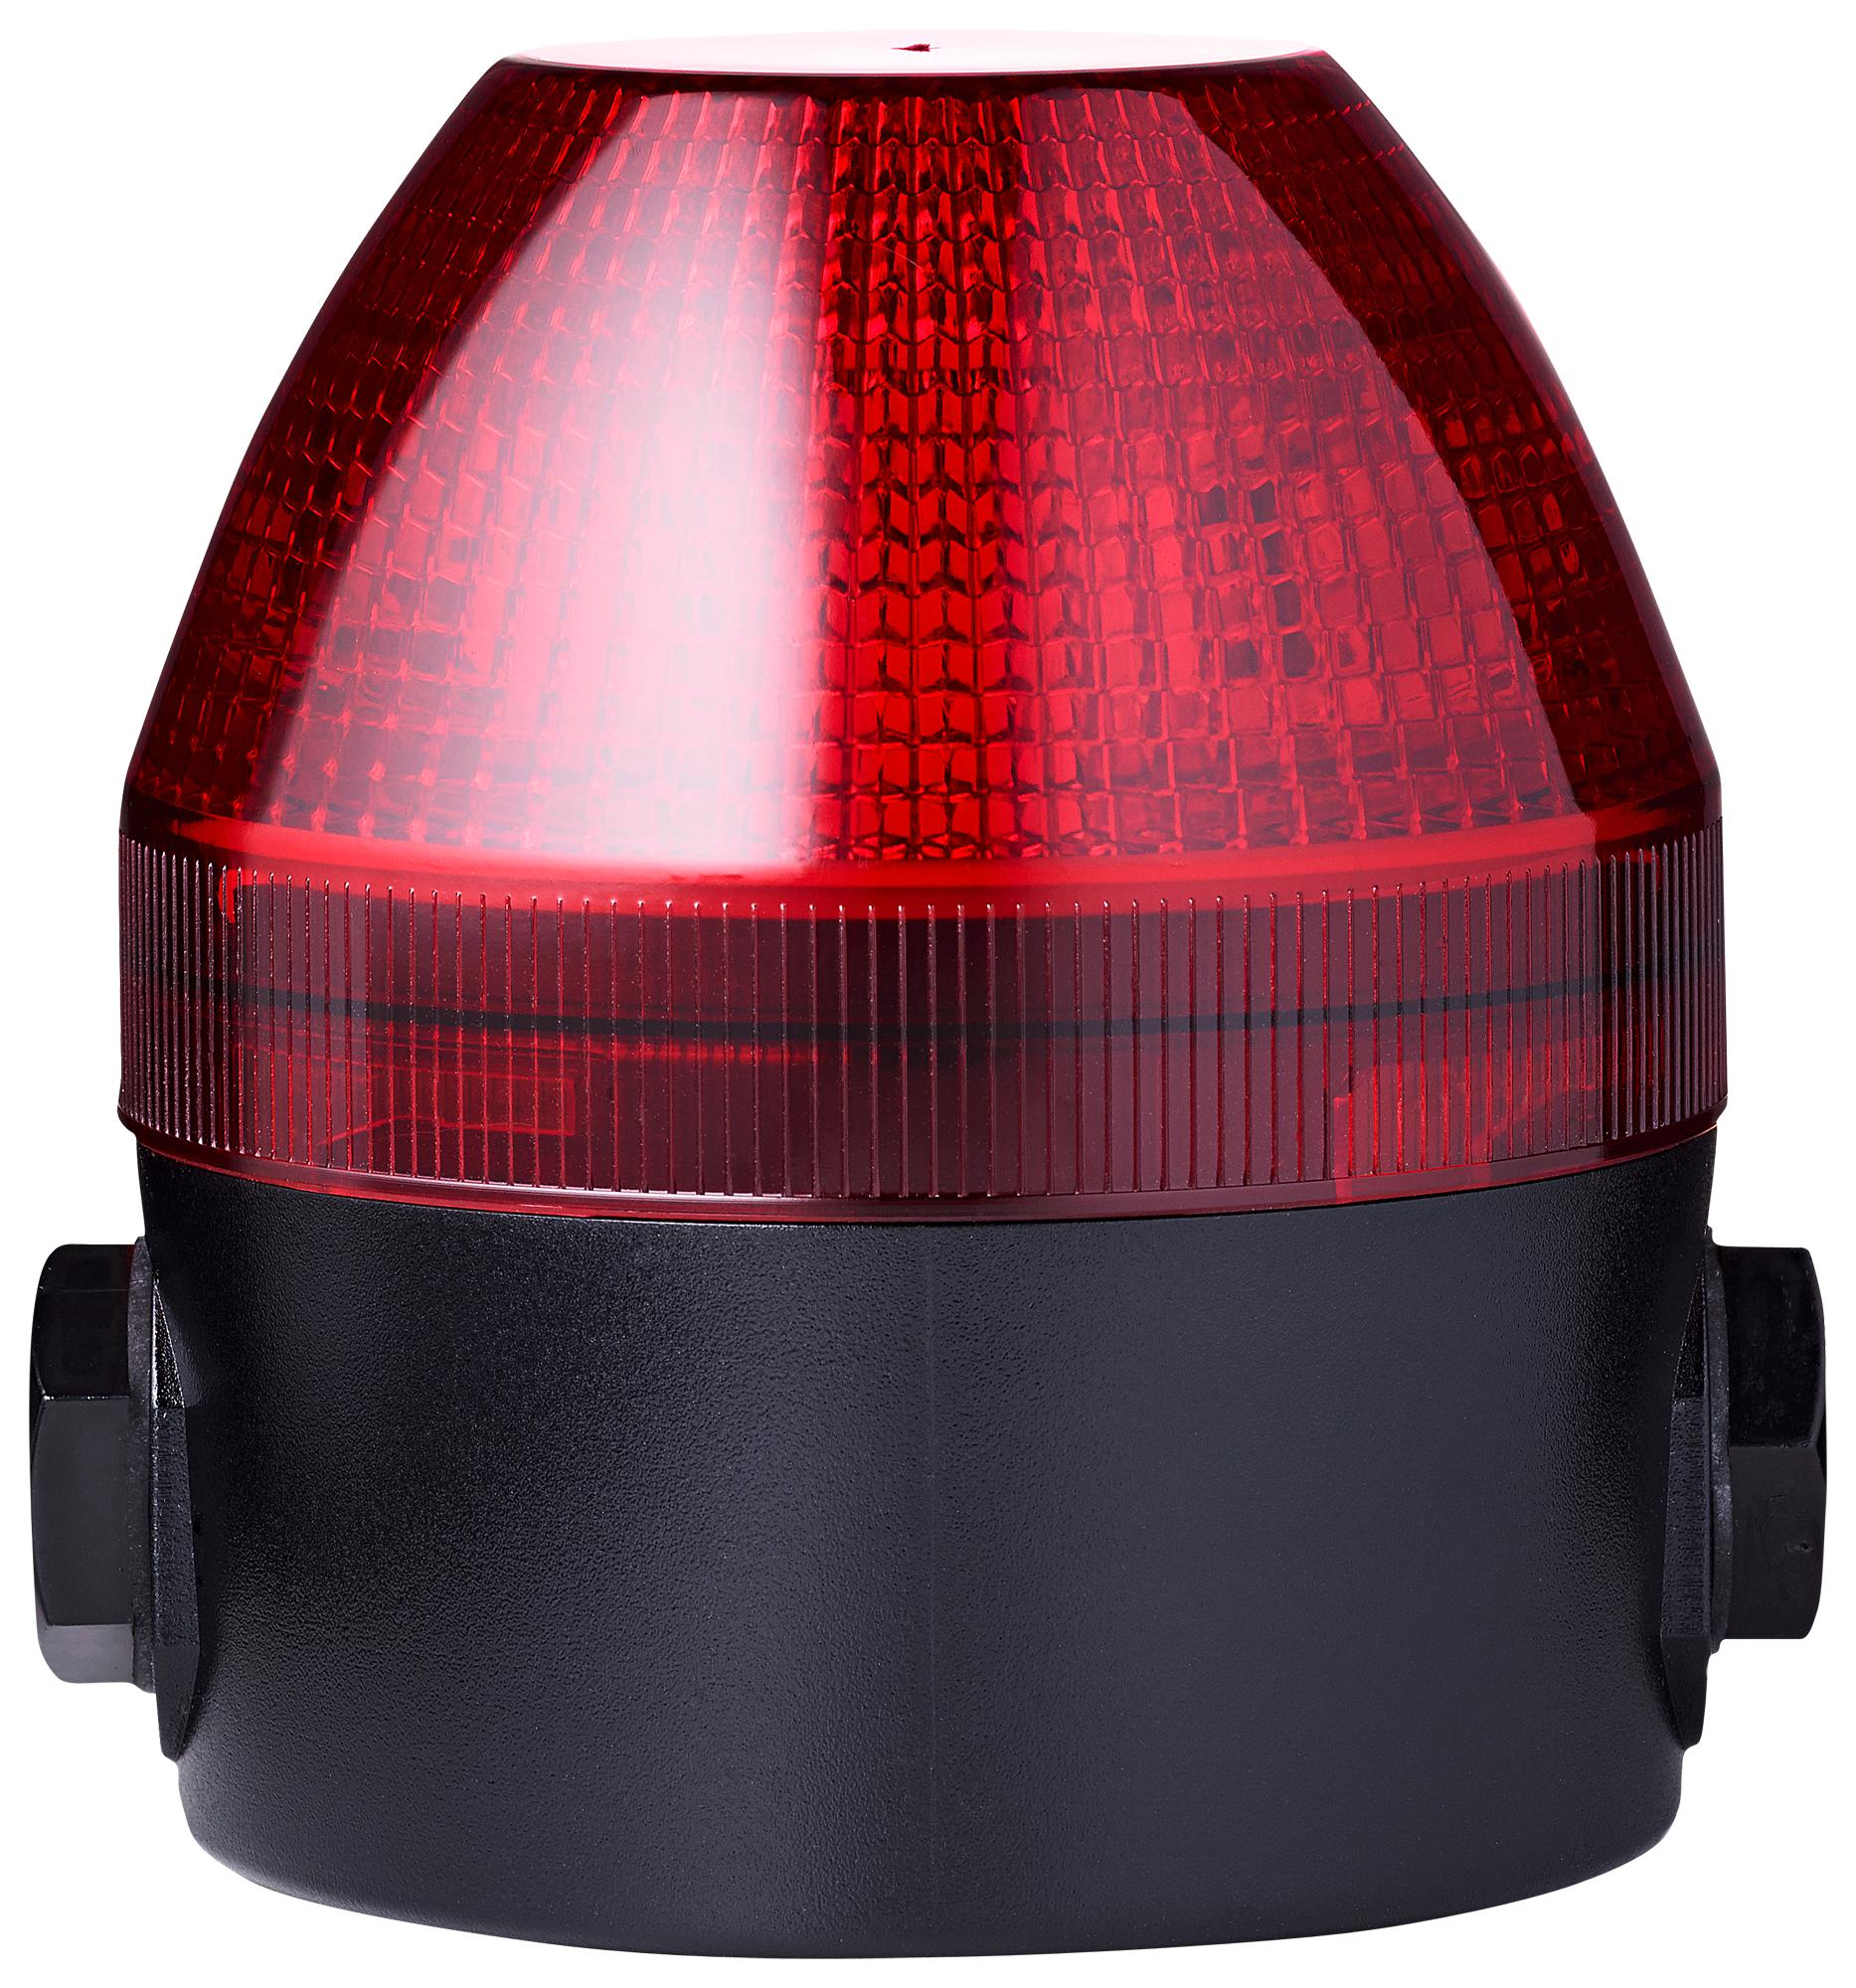 Auer Signal 440102413 Beacon, Flashing/steady, Red, 240V